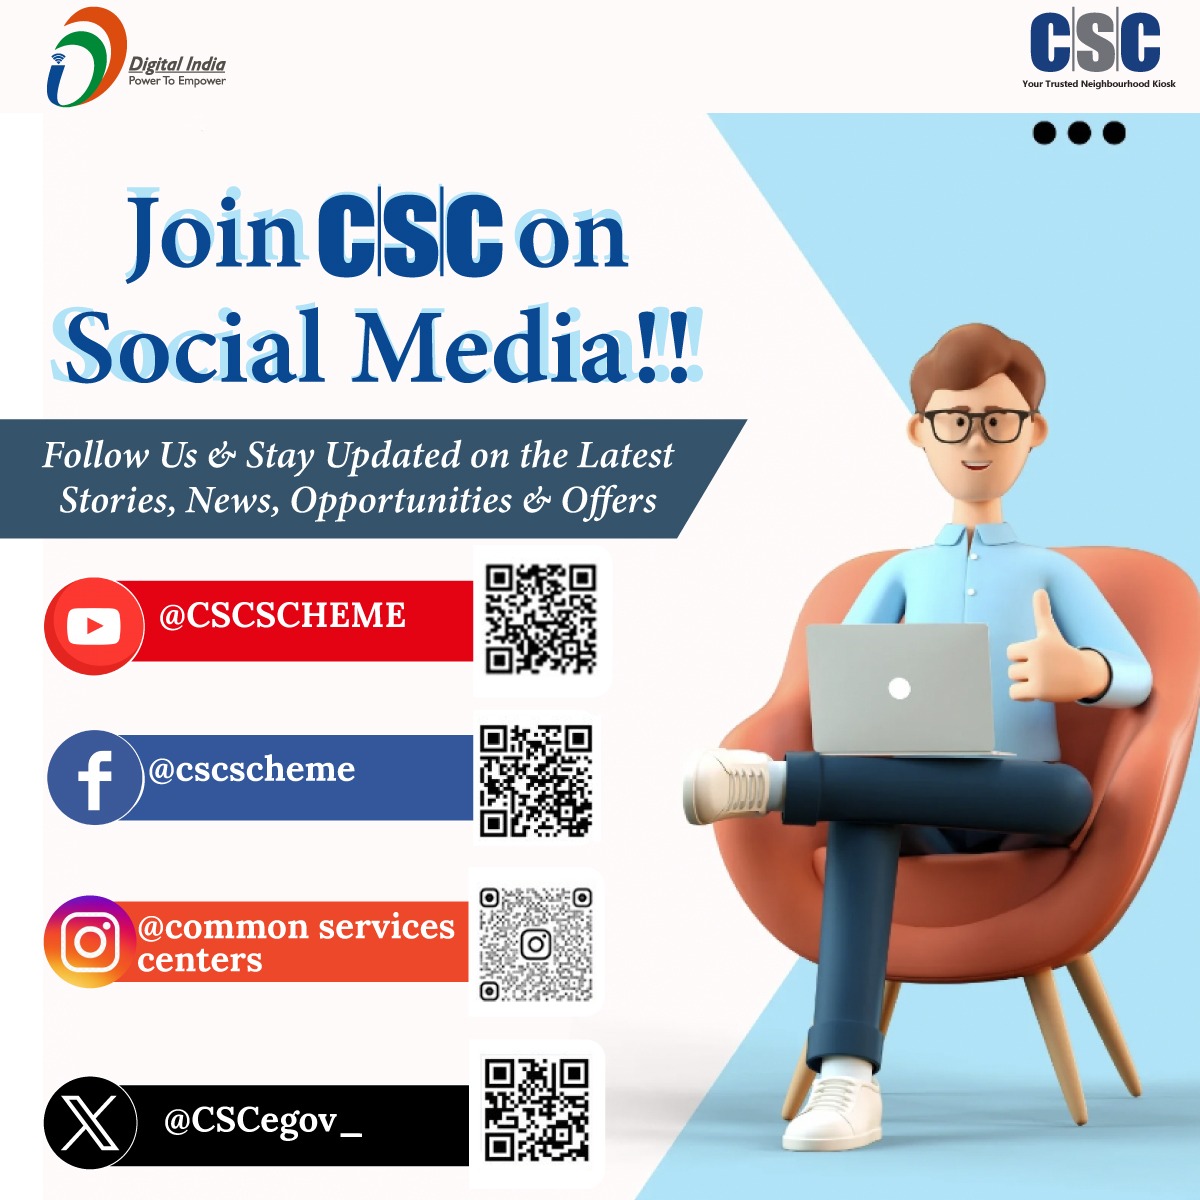 Join #CSC on Social Media... Follow us & stay updated on the latest stories, news offers, and opportunities! Facebook: facebook.com/cscscheme Twitter: twitter.com/CSCegov_ YouTube: youtube.com/@CSCSCHEME Instagram: instagram.com/commonservices… #DigitalIndia #CSCSocialMedia